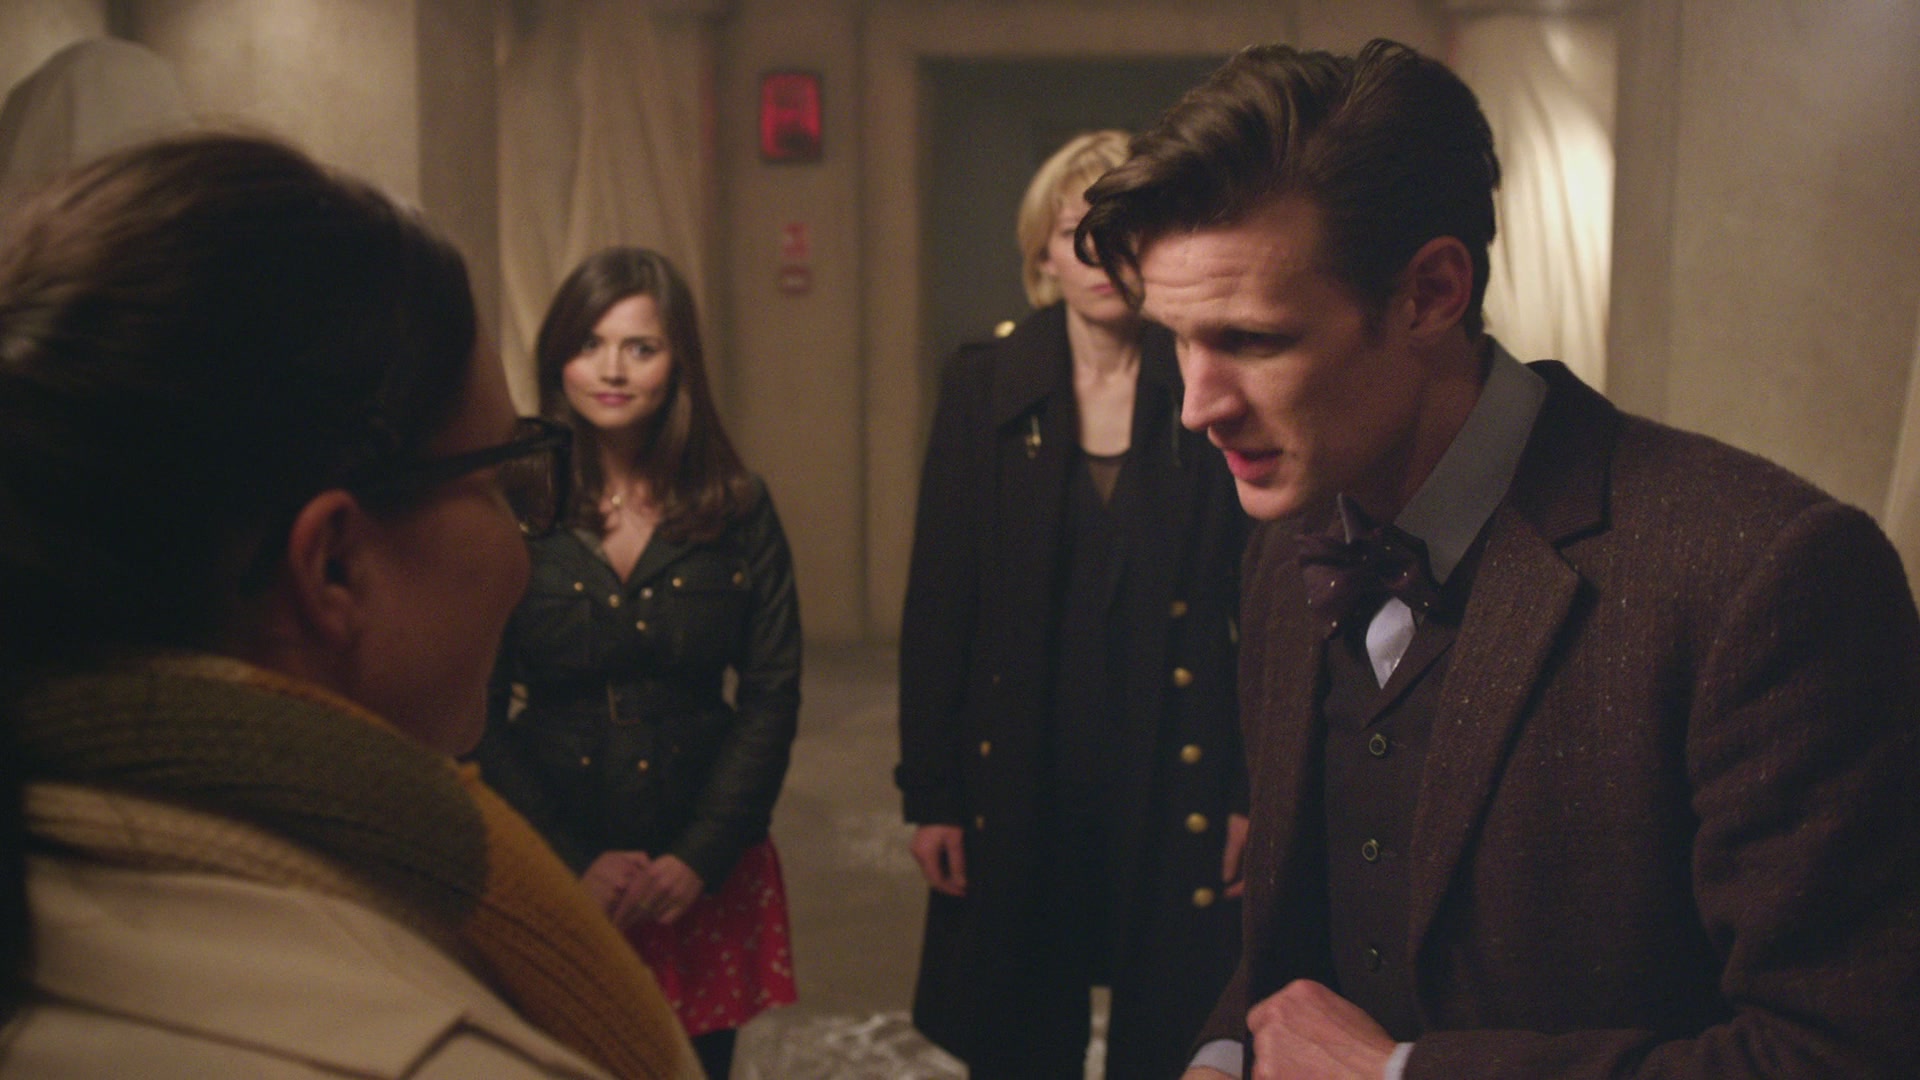 DayOfTheDoctor-Caps-0311.jpg